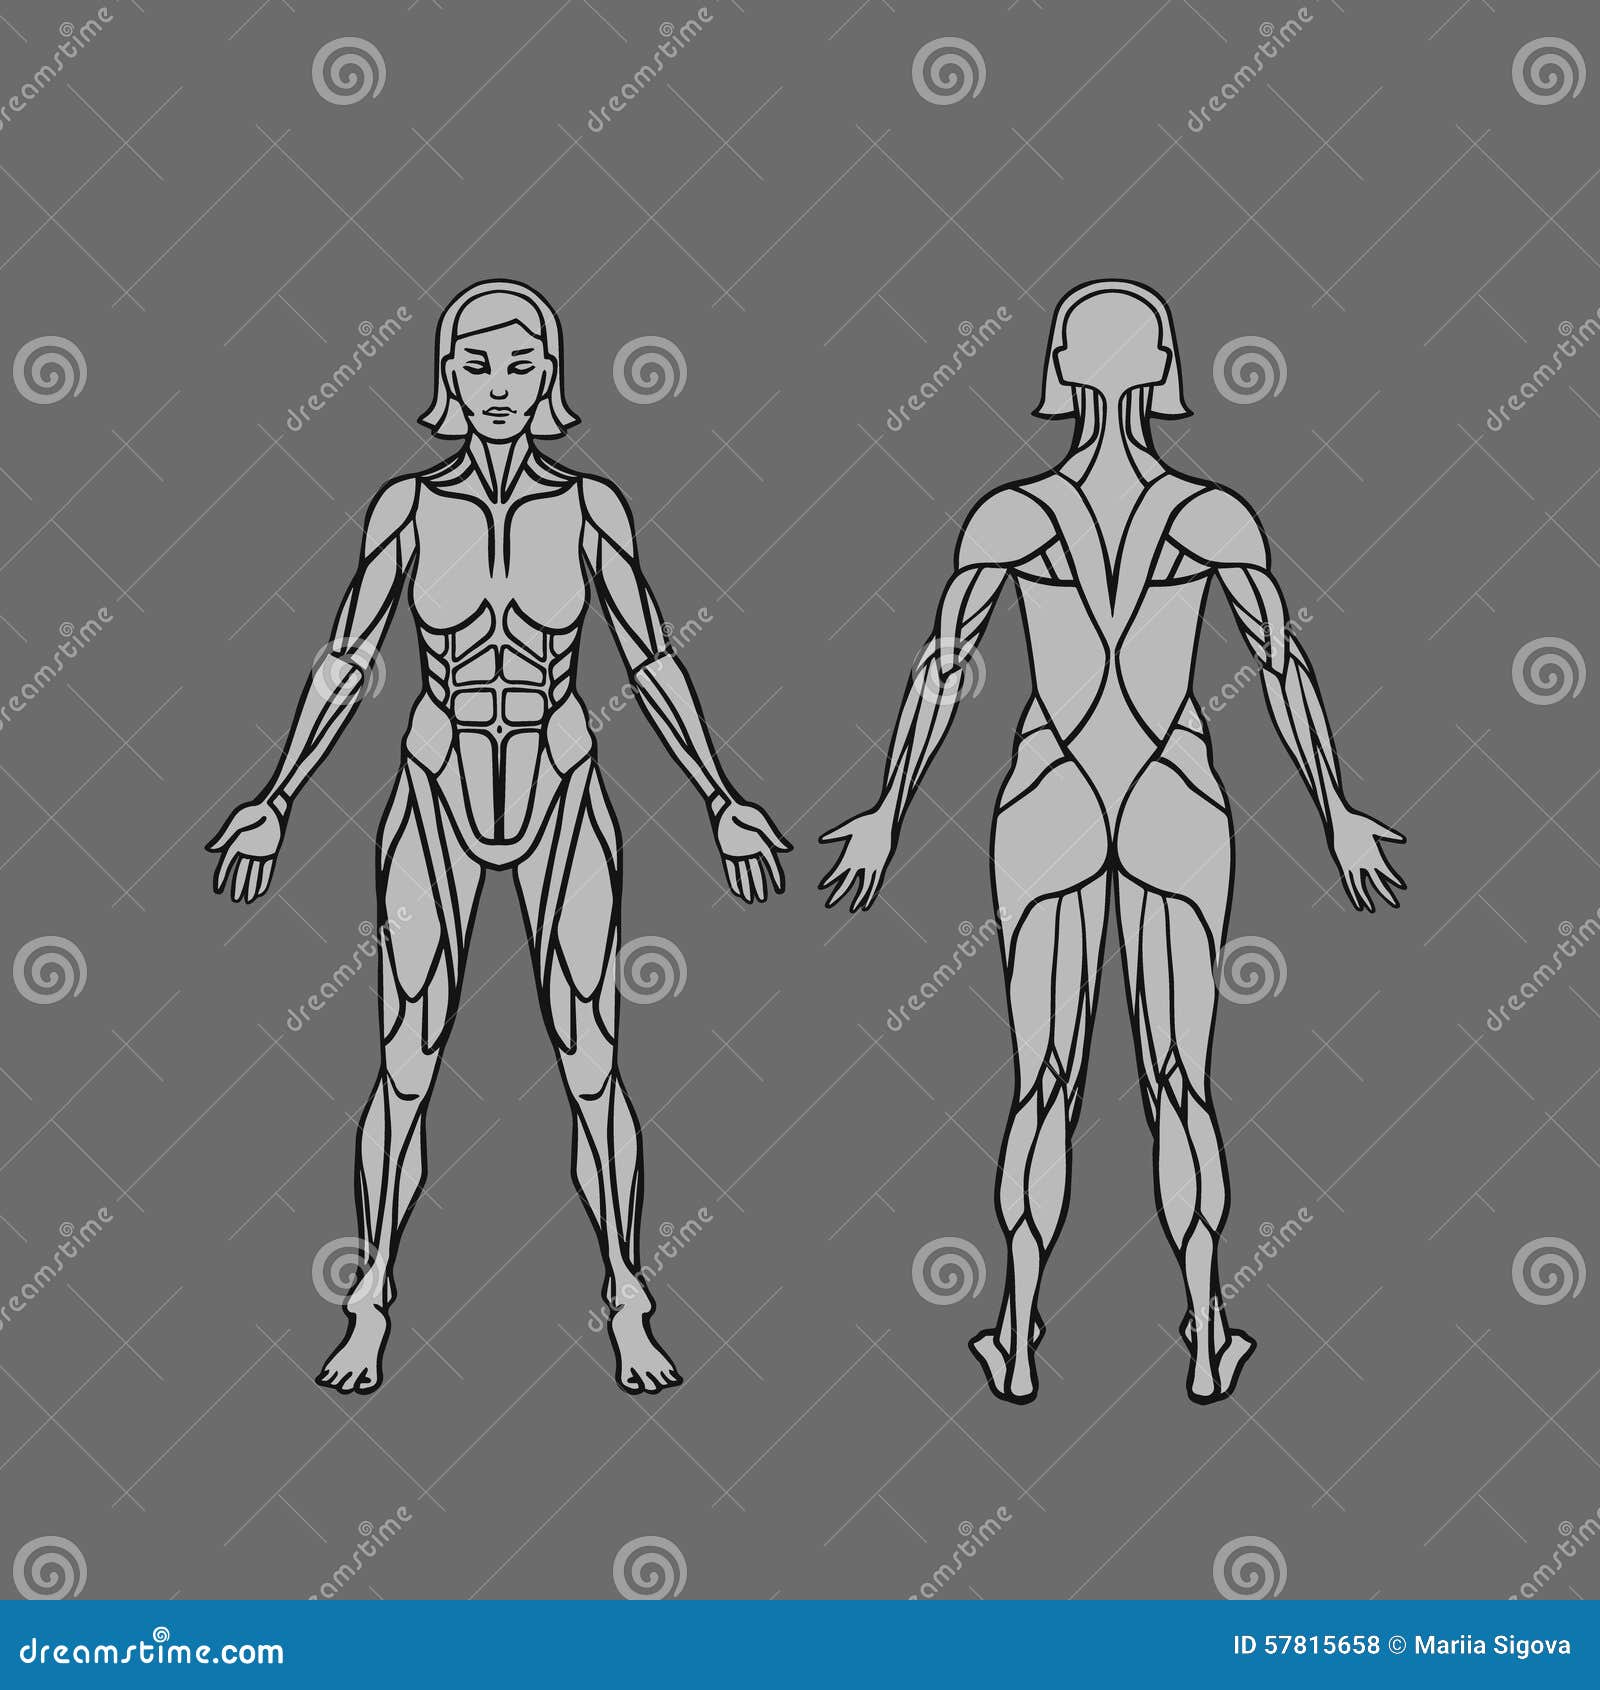 Back Muscles Drawing Reference Female : Pin by Fox on Anatomy | Figure